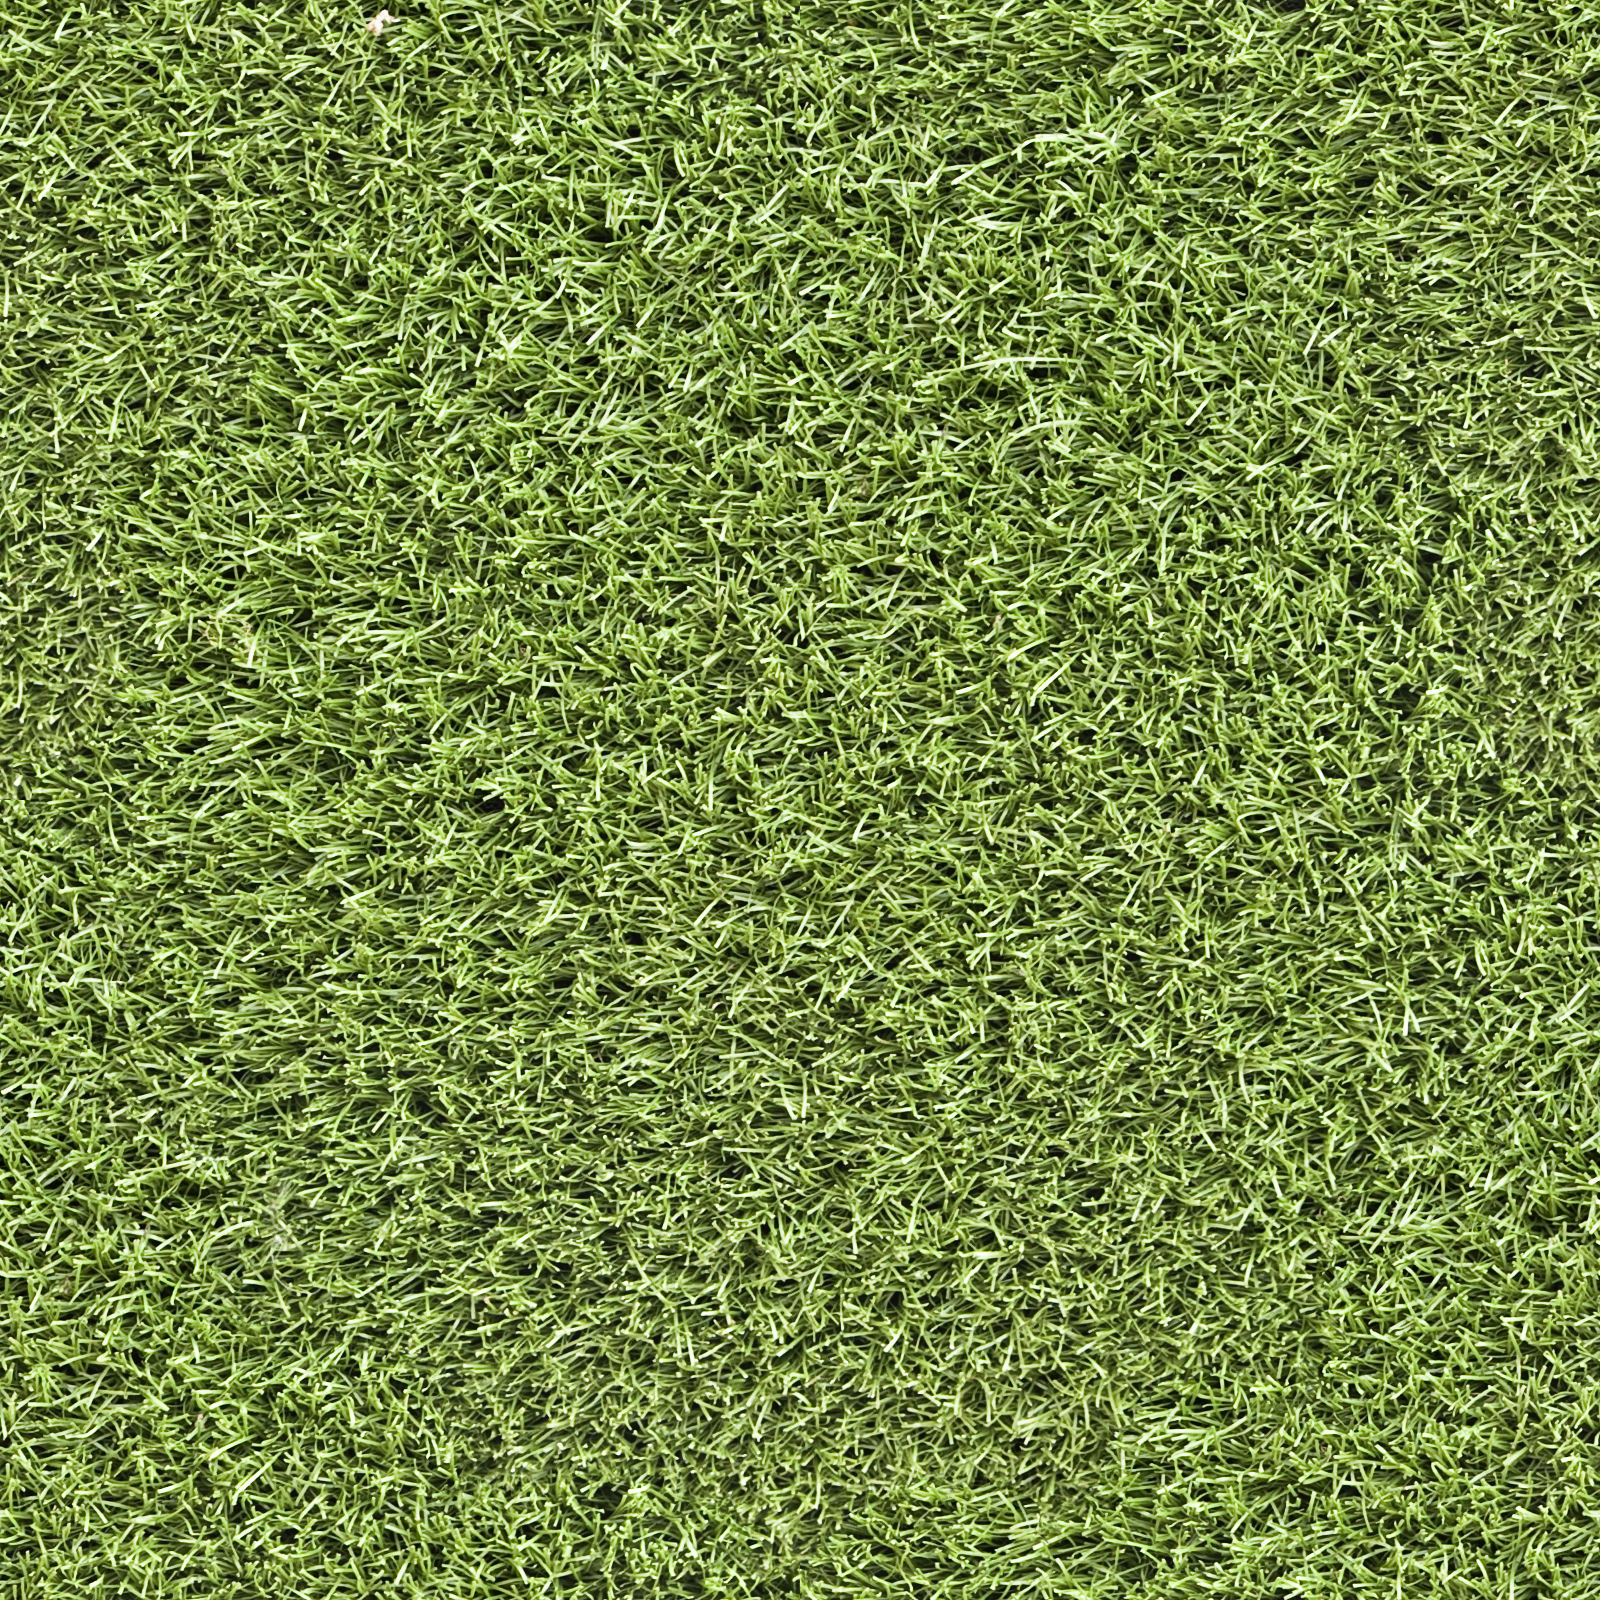 unity 3d grass texture free download